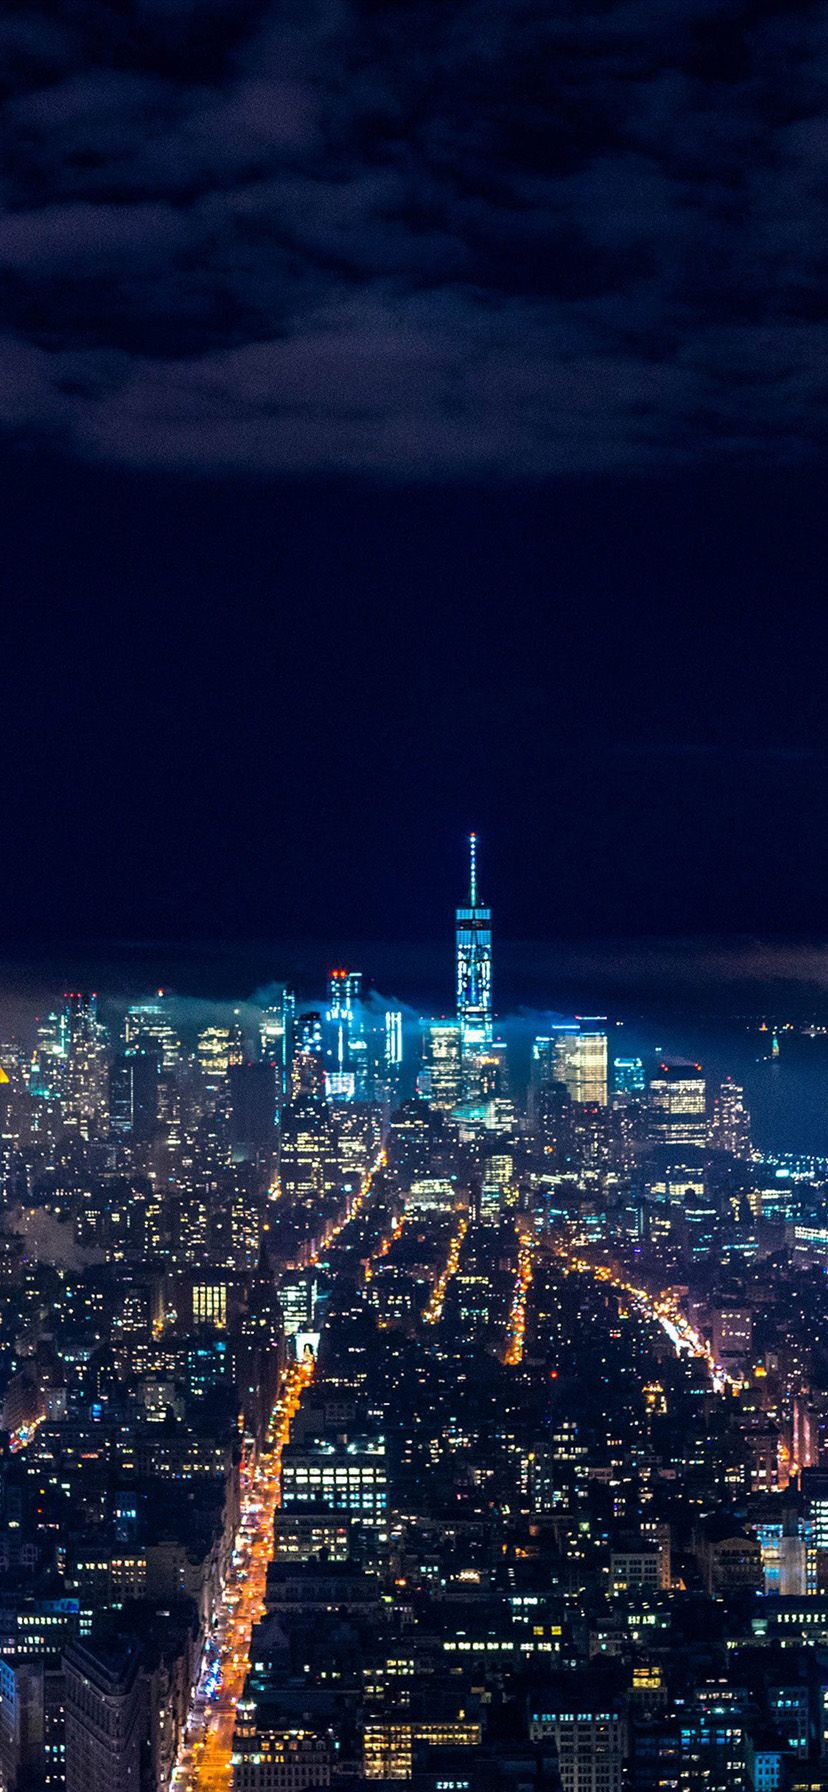 iPhone Xr Wallpaper For Nx53 City Night Skyline Dark Xr Wallpaper City Wallpaper & Background Download